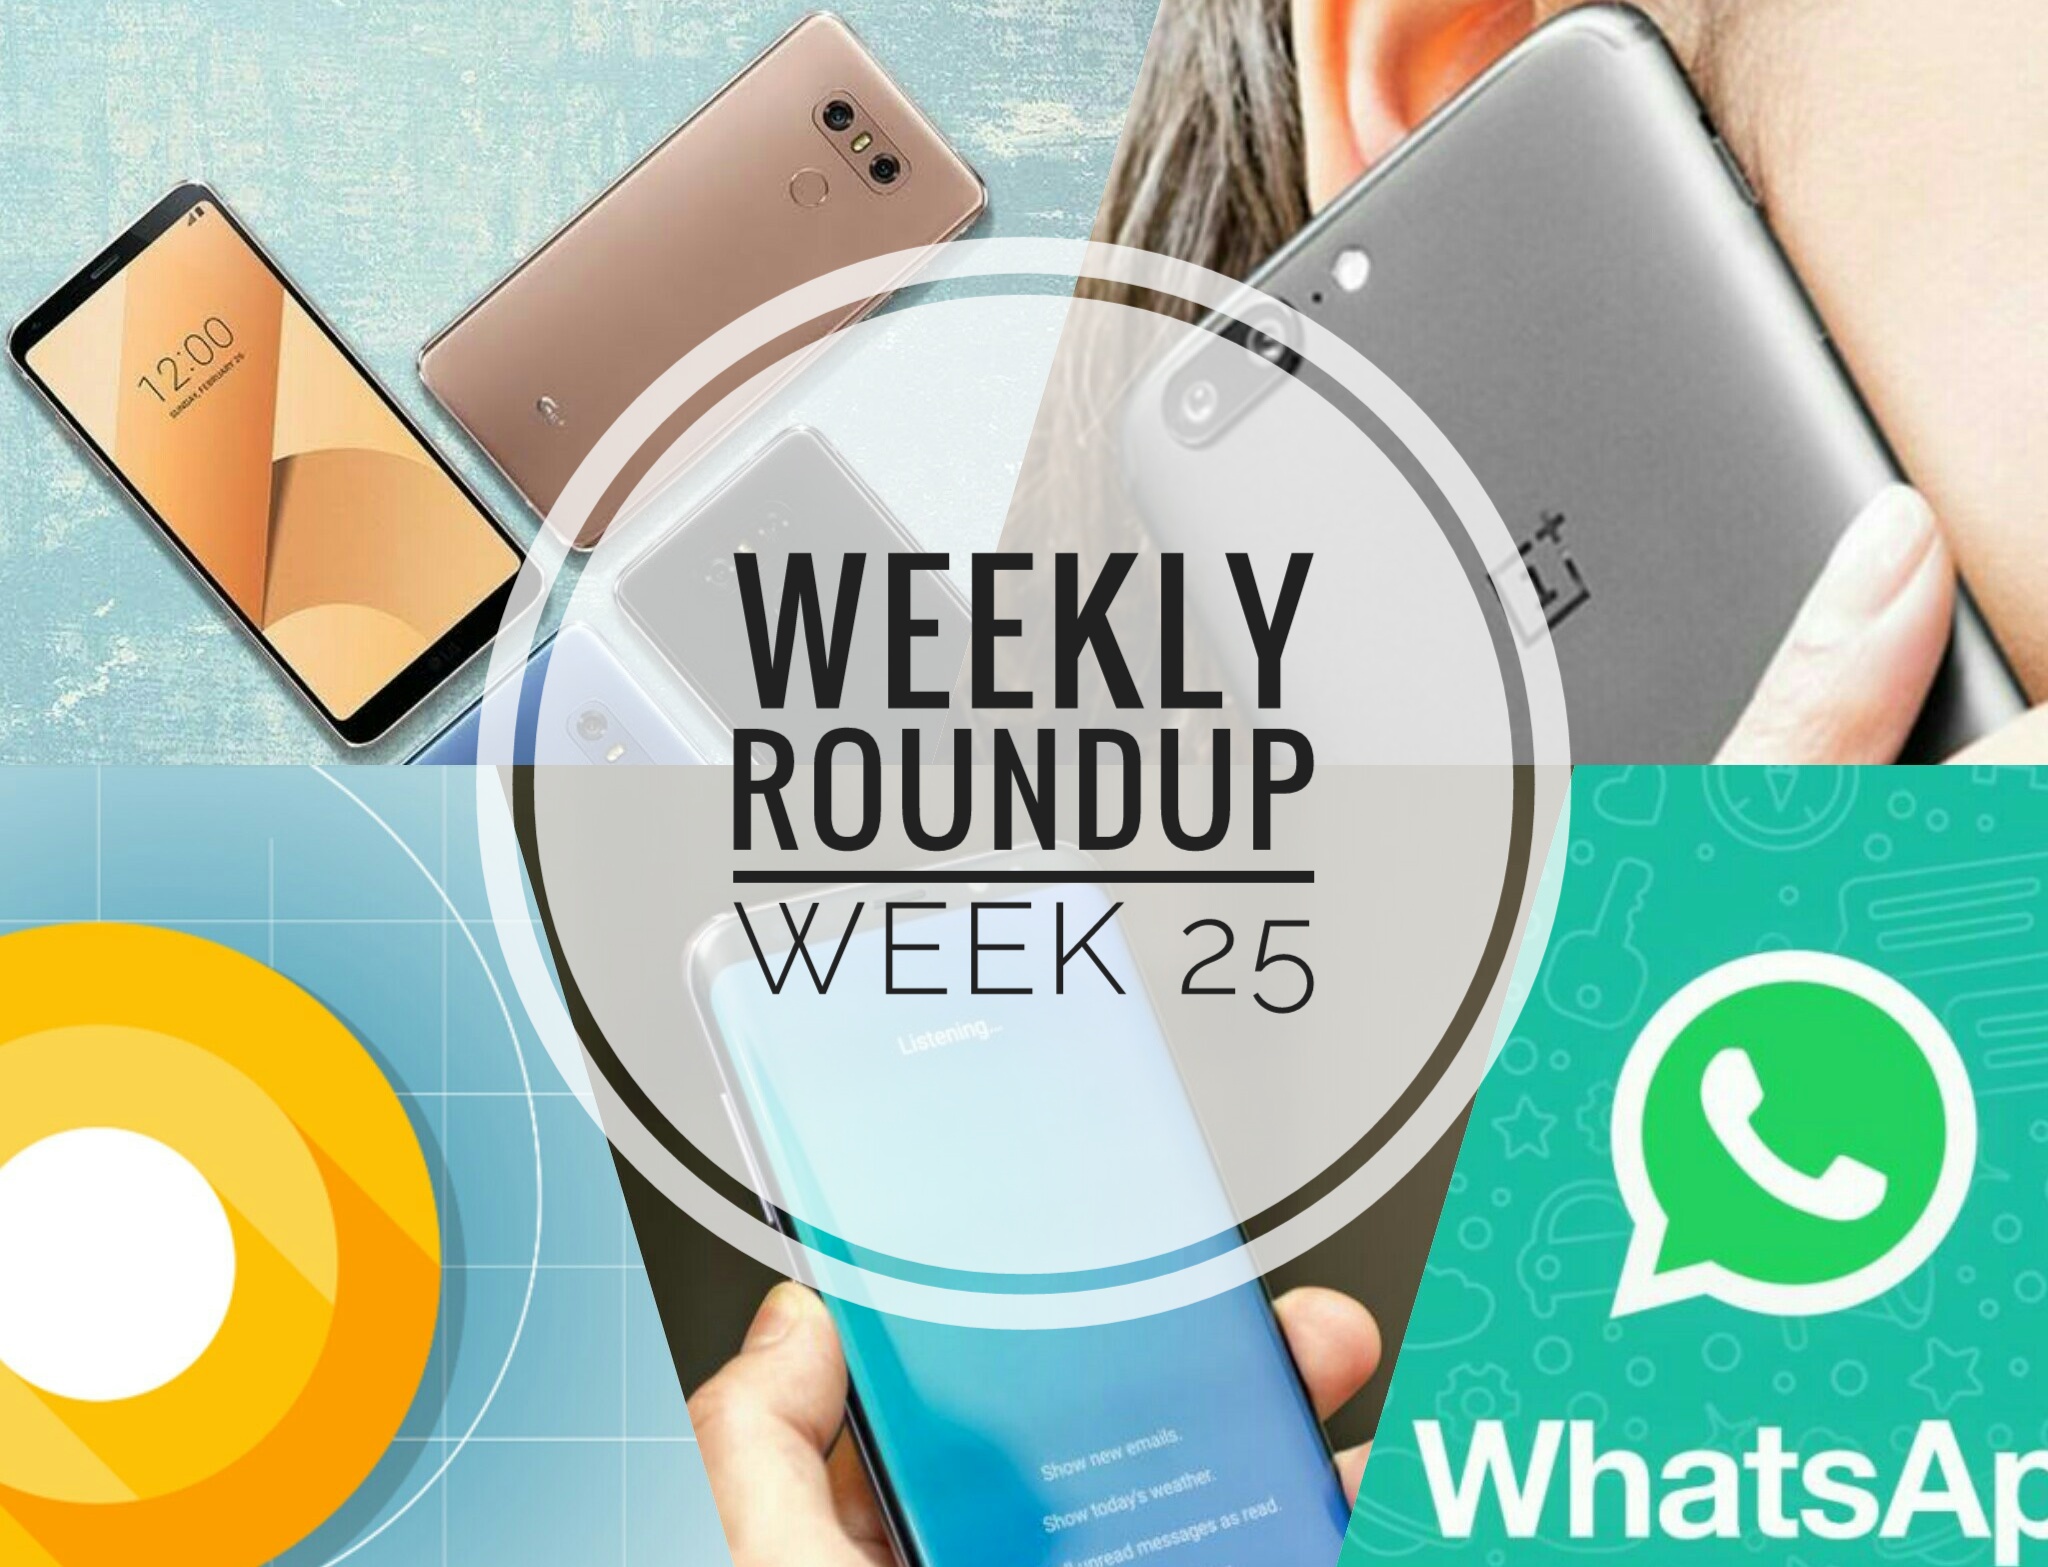 Weekly roundup: Highlights of Week 25, LG's new experiment, OnePlus 5 and more 9